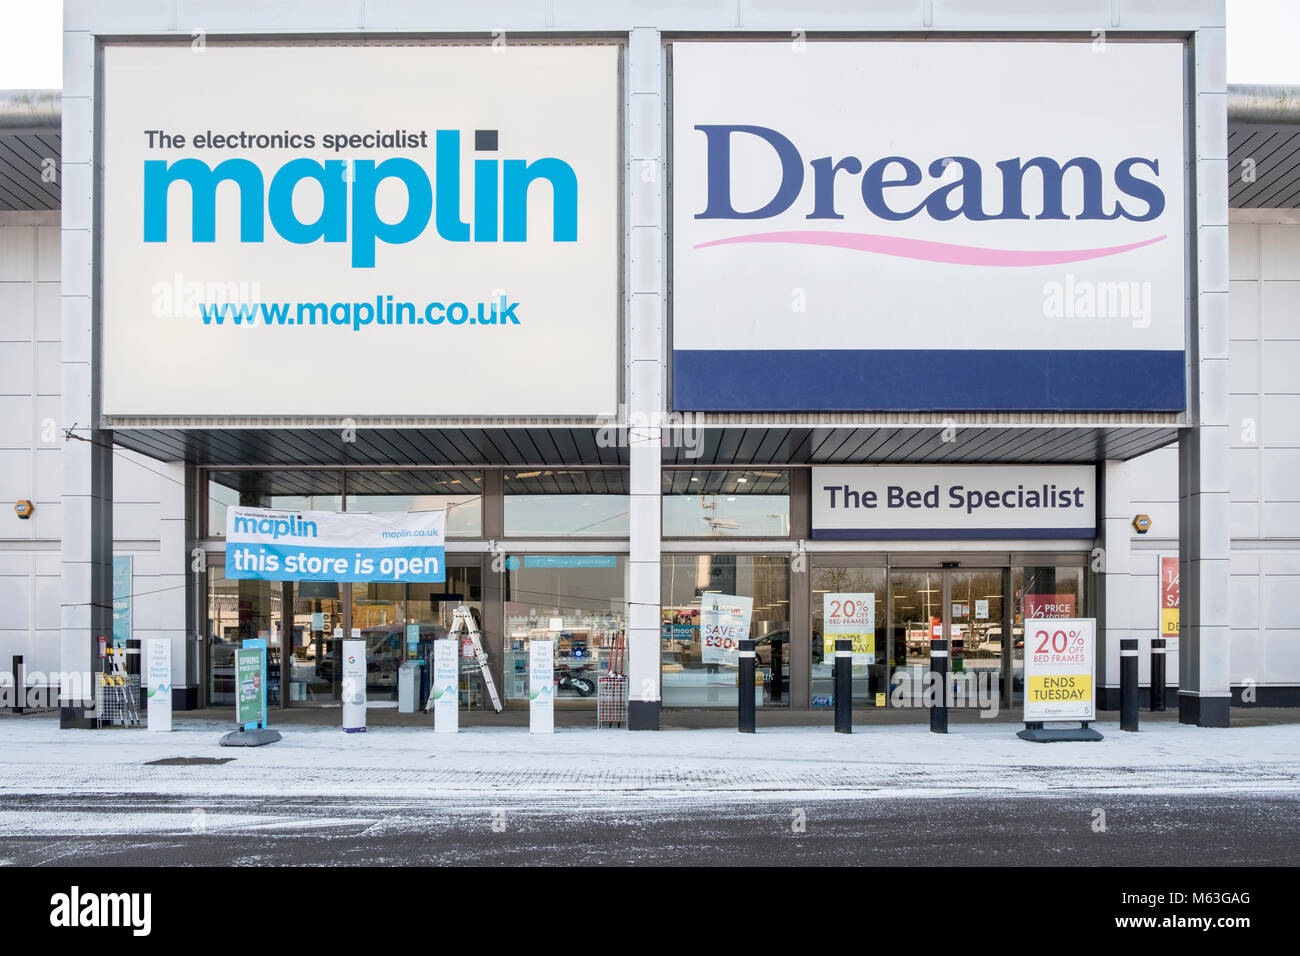 Reading, Berkshire, UK. Wednesday 28th February 2018. Major electronics retailer Maplin has entered administration with PwC after talks with potential buyers failed to secure a sale. Banners stating 'this store is open' remain on the storefront. © D. Callcut/Alamy Live News Stock Photo